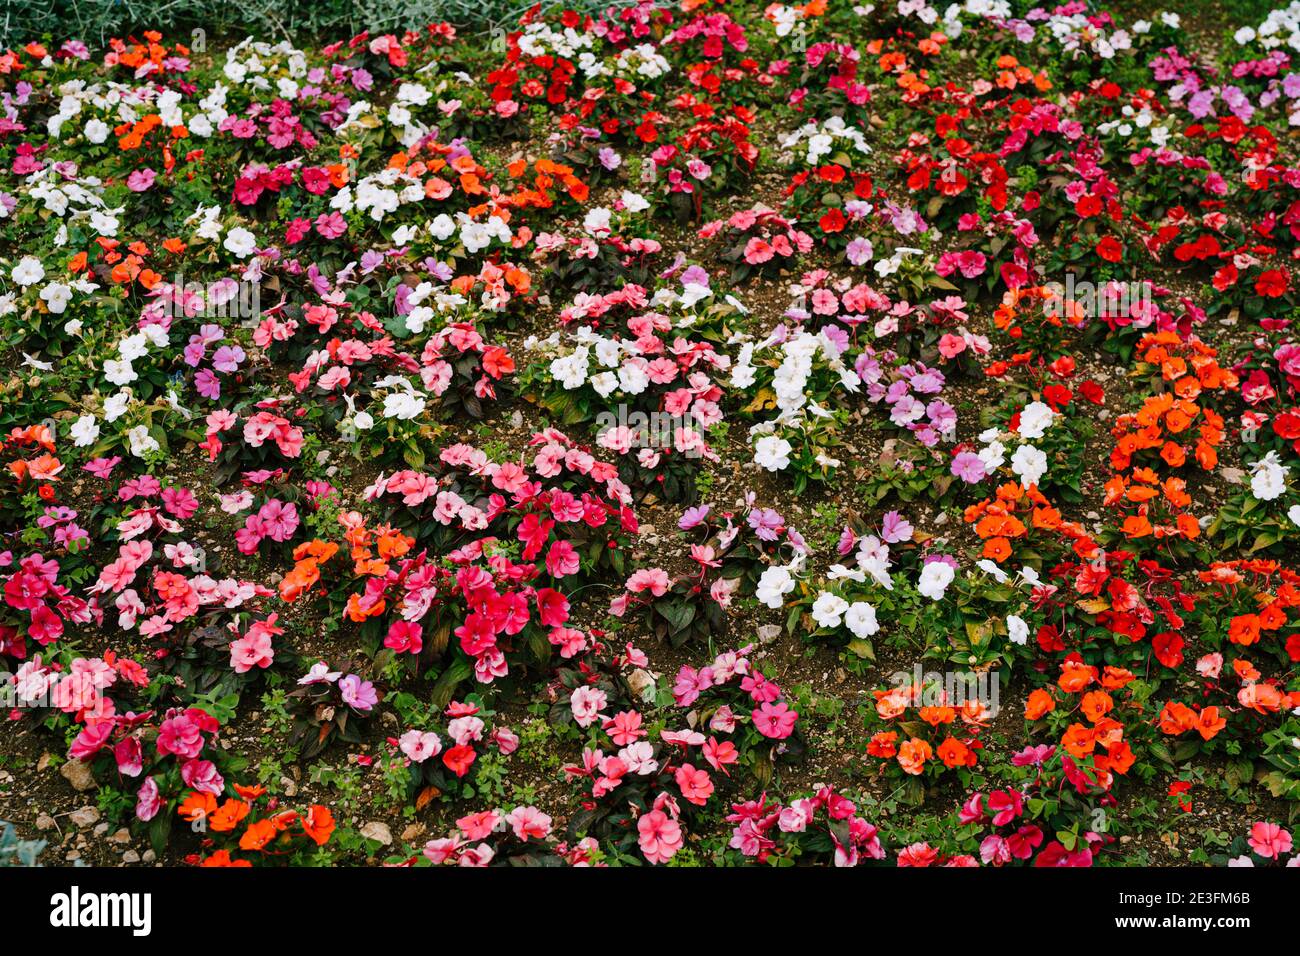 Red, white, orange and purple balsam flowers on the garden bed. Stock Photo